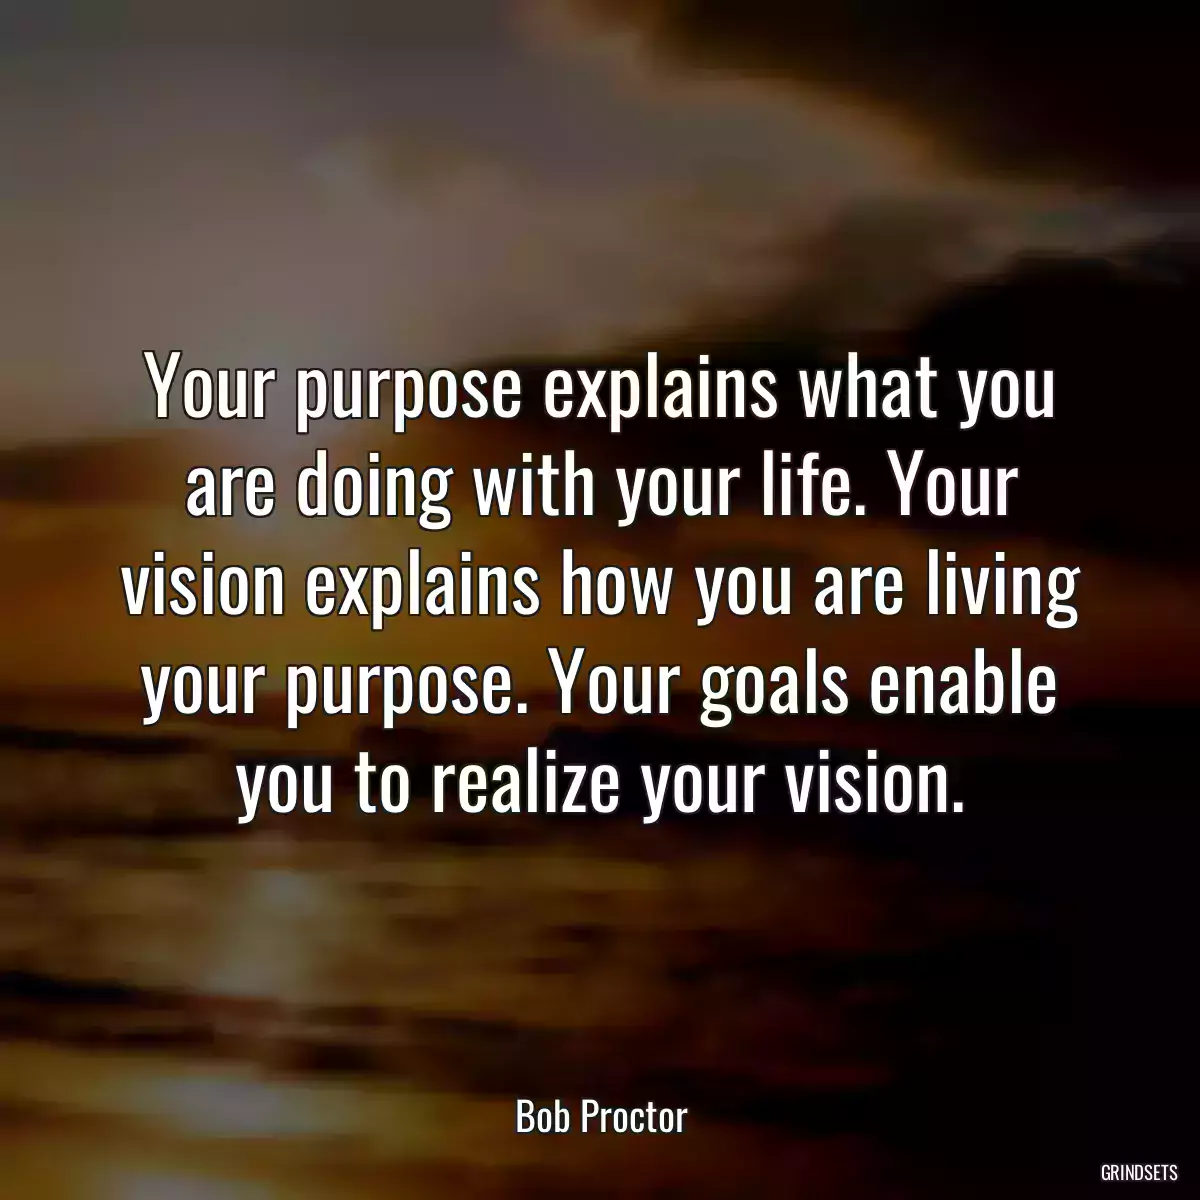 Your purpose explains what you are doing with your life. Your vision explains how you are living your purpose. Your goals enable you to realize your vision.